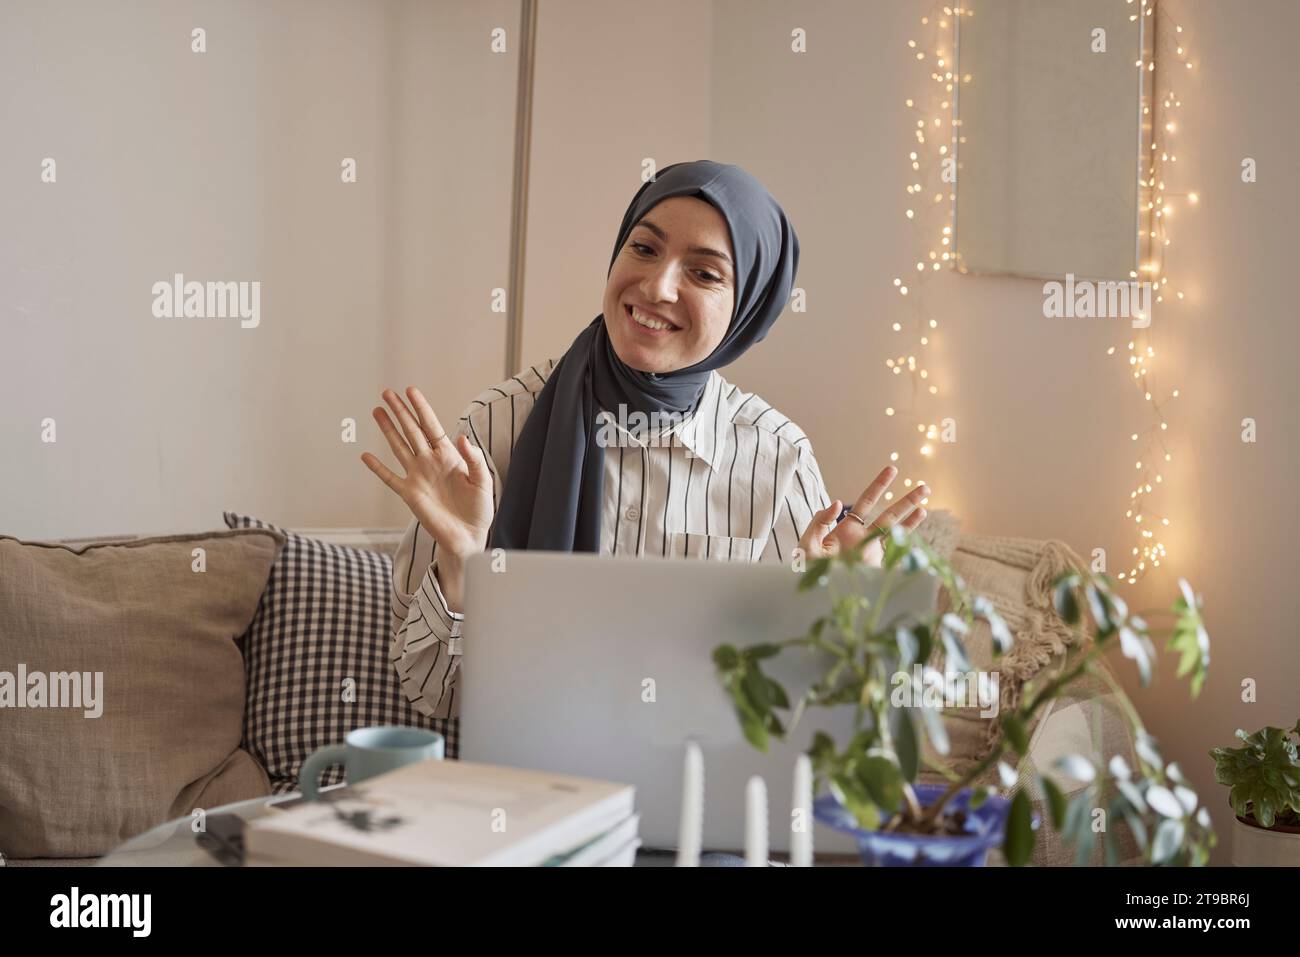 Smiling young businesswoman waving on video call over laptop while working in living room Stock Photo